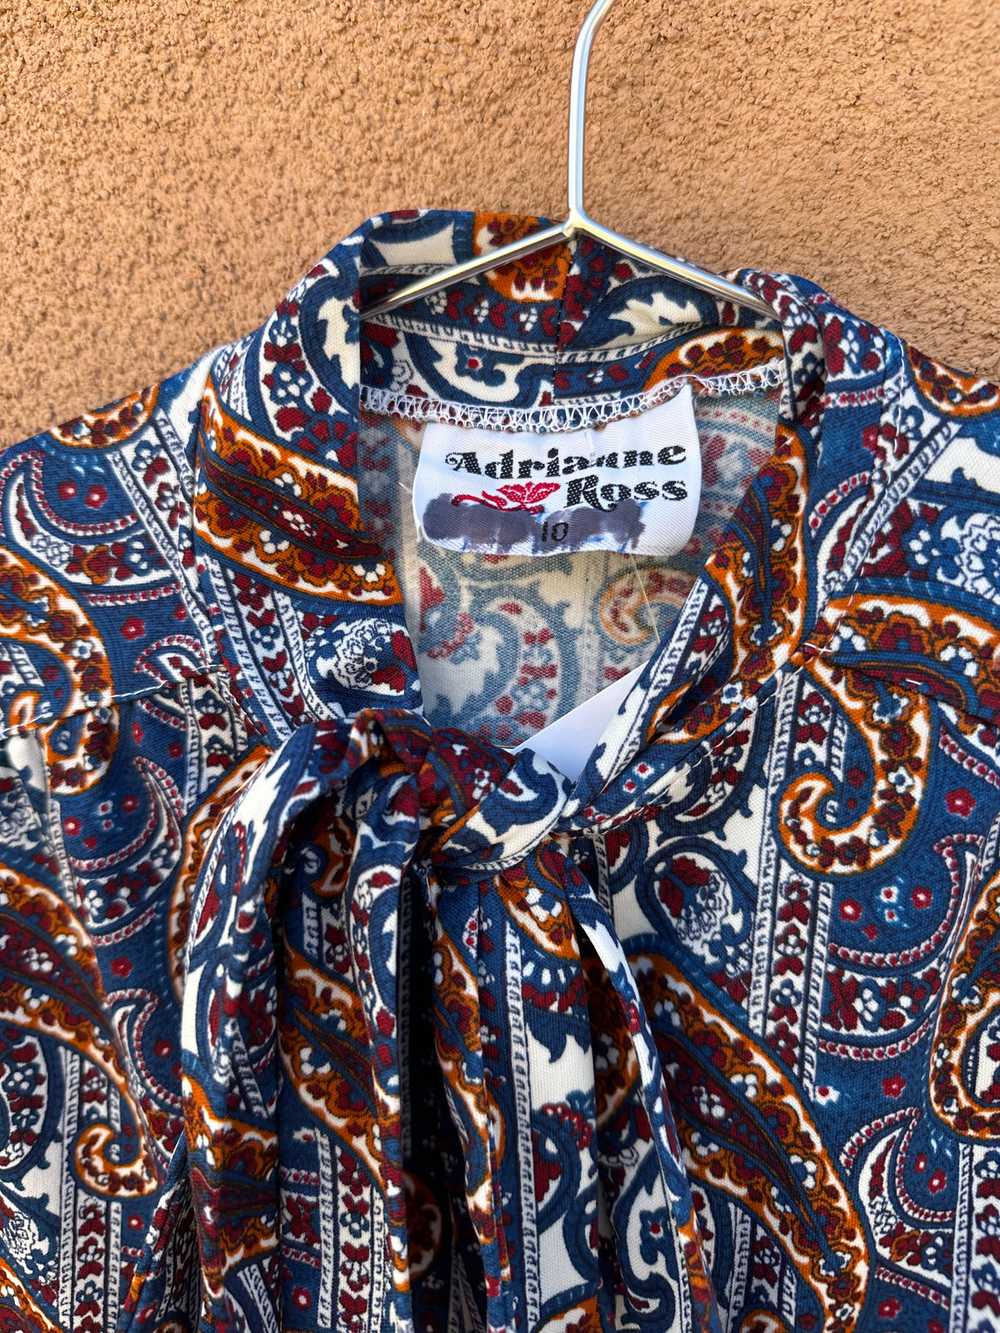 70's Adrianne Ross Paisley Blouse - image 2